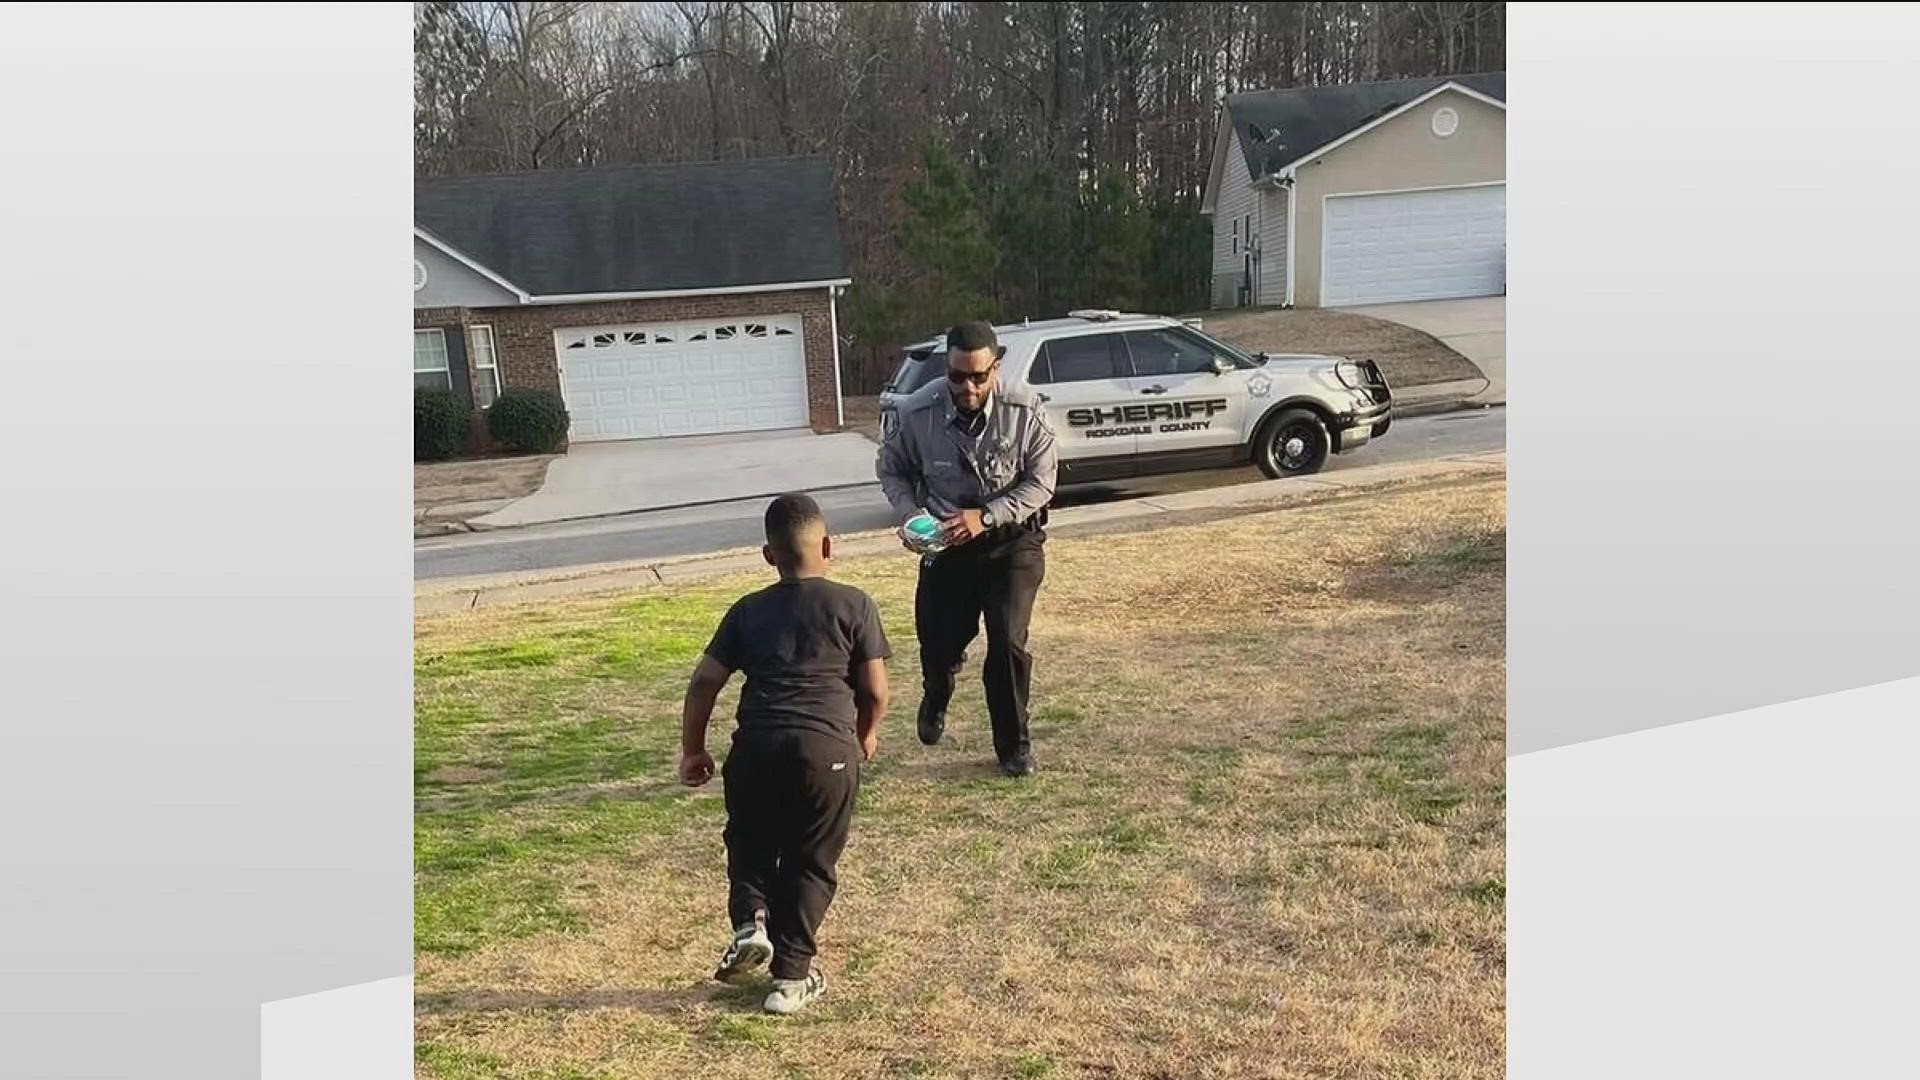 The boy's mom said he was so excited to play with the sheriff's deputy.